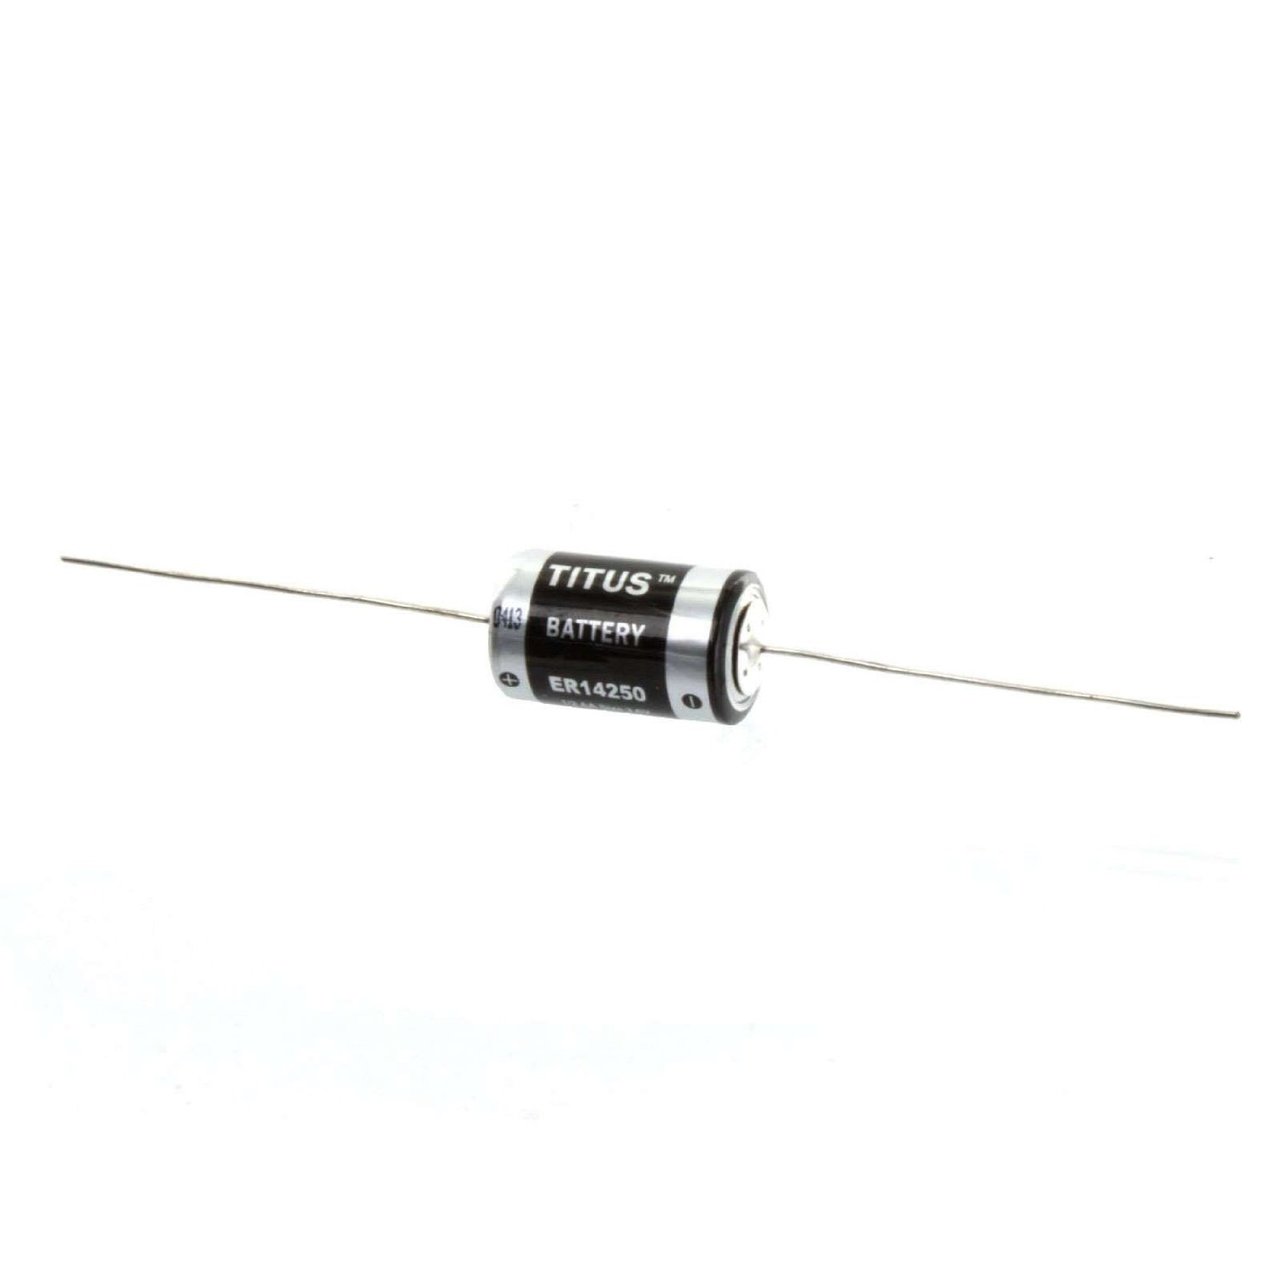 Titus 1/2 AA Size 3.6V ER14250FAX Lithium Battery With Axial Wire Leads - 4 Pack + Free Shipping!